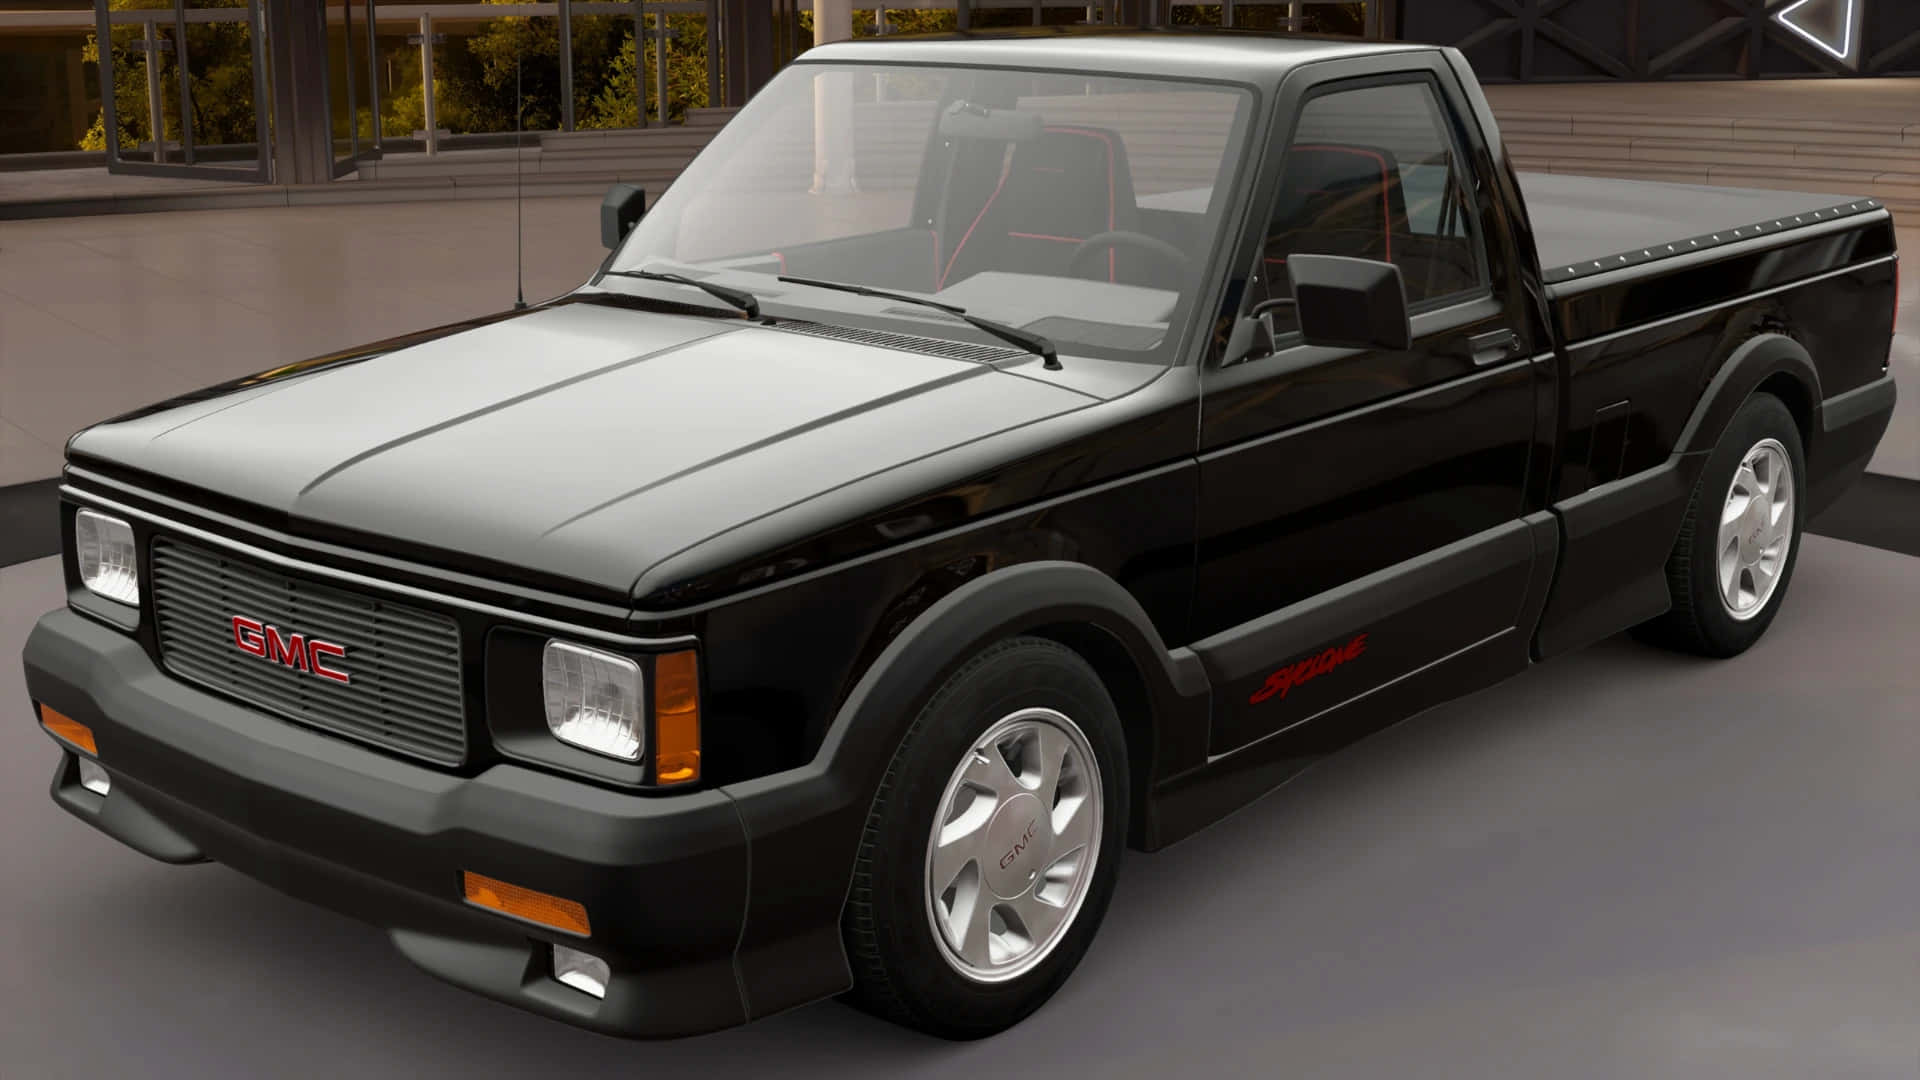 GMC Syclone - A High-performance Vintage Pickup Truck Wallpaper